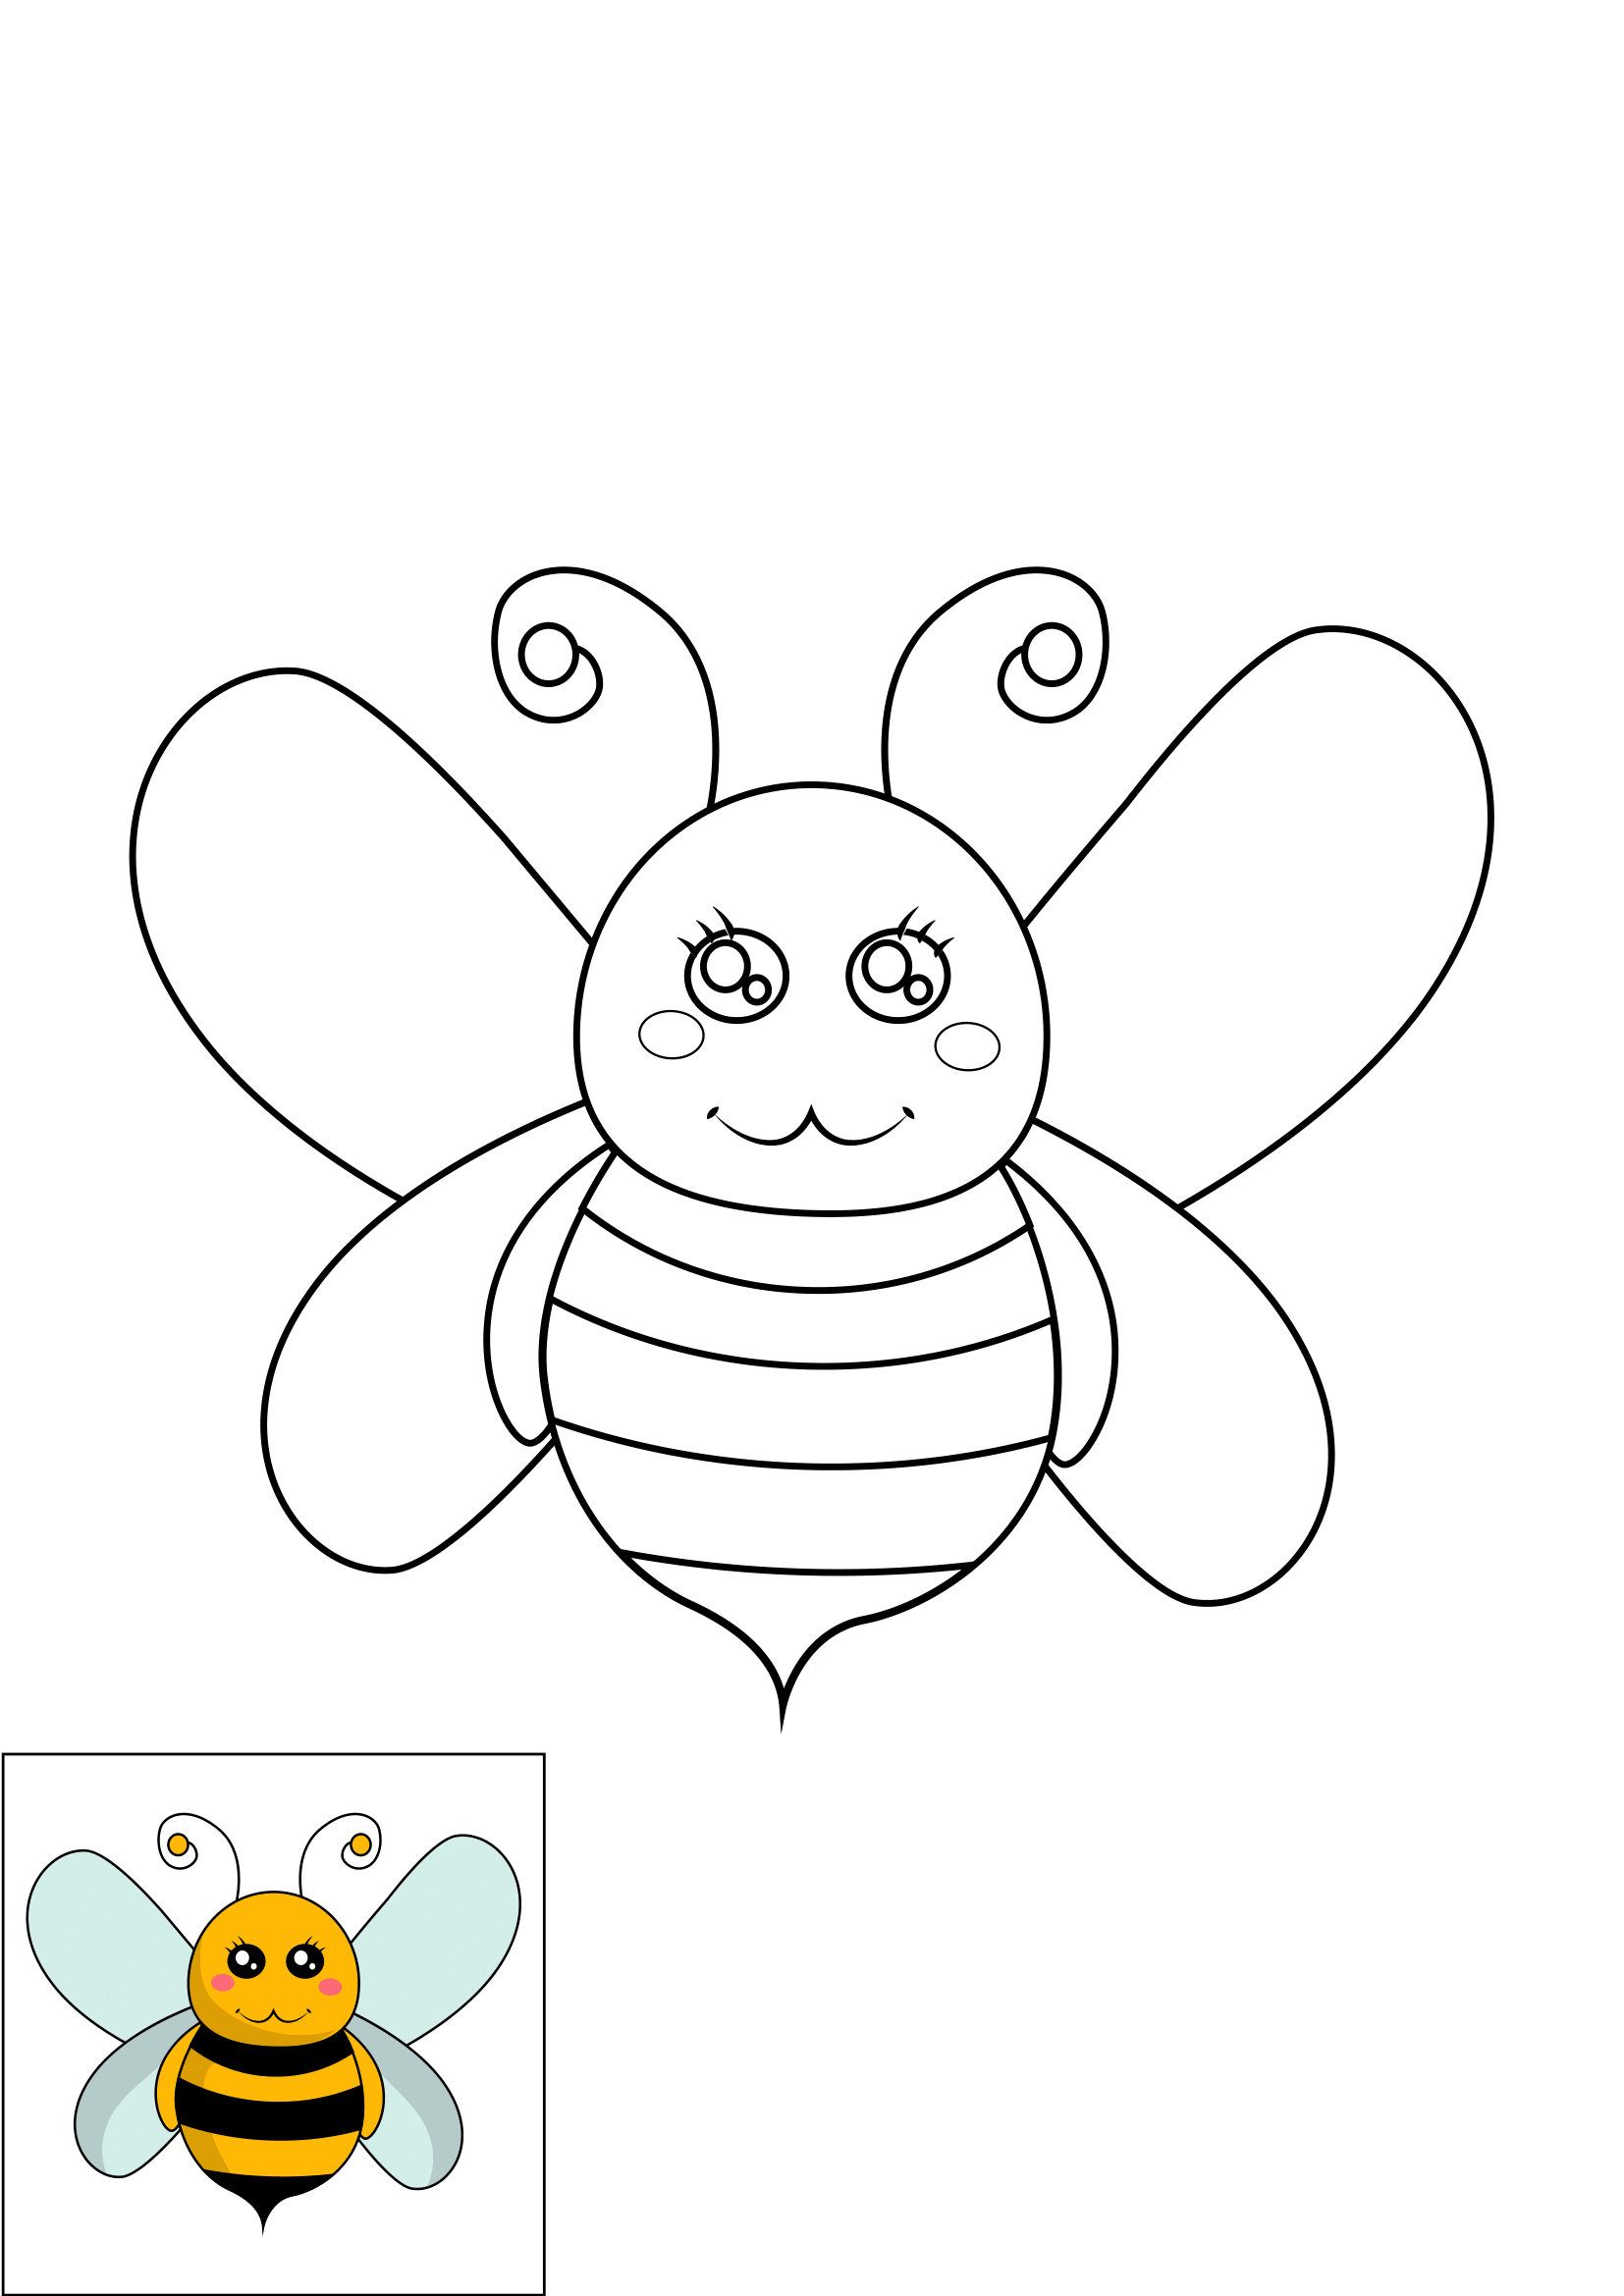 How to Draw A Bee Step by Step Printable Color